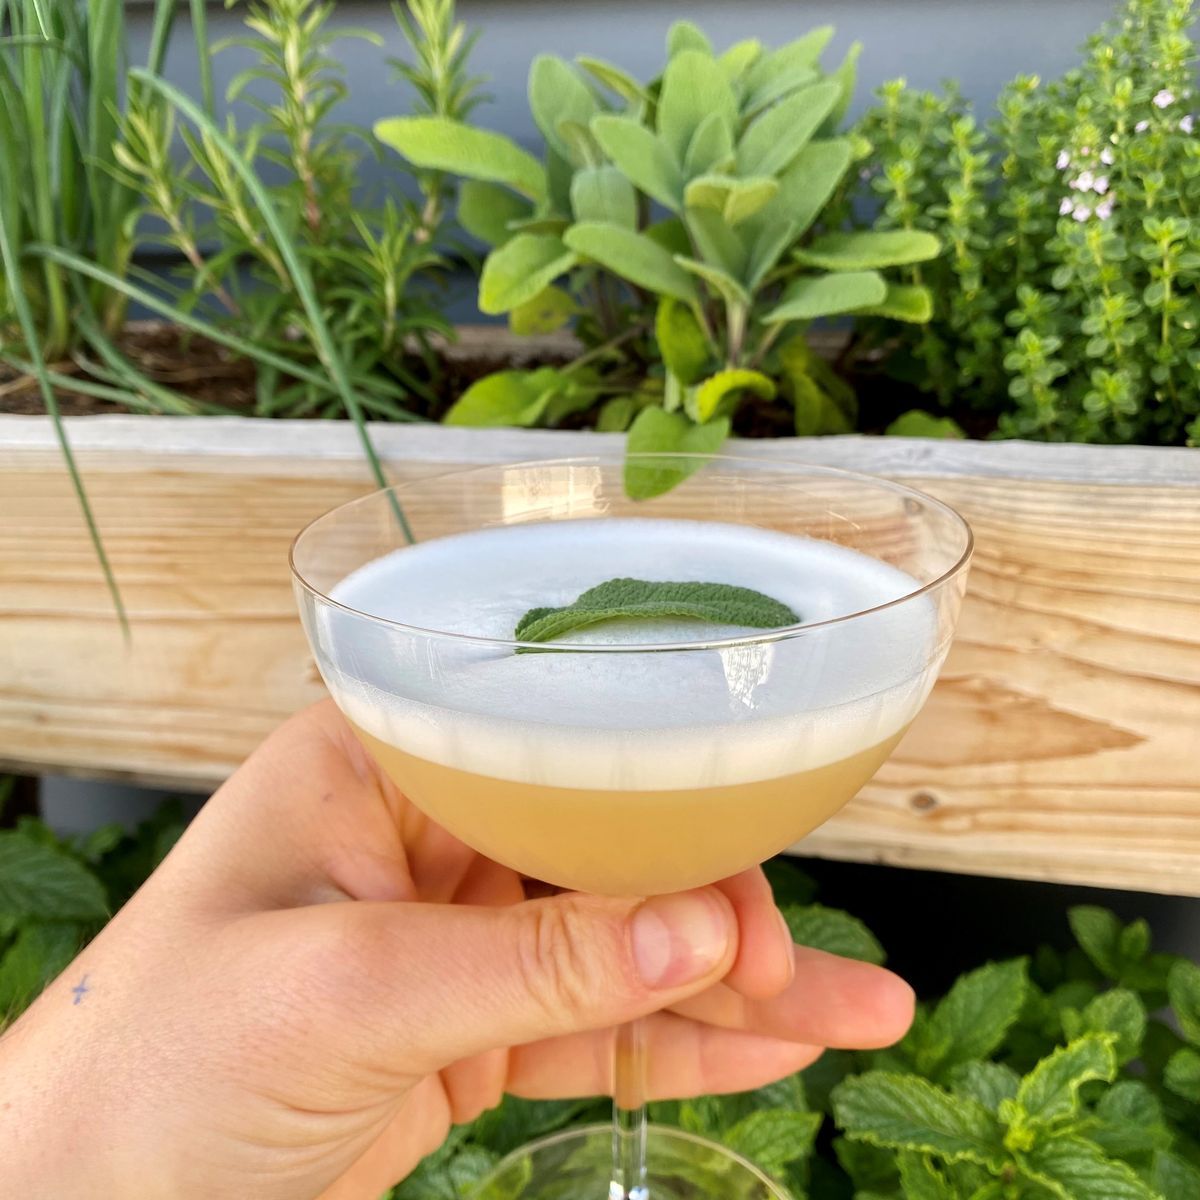 This is a sage-flavoured whisky sour. This savoury syrup is so easy to make if you have fresh sage growing in your garden. I found that the volume of lemon that you would typicaly use in a sour was overwhelming the sage flavour, so I reduced the lemon, which gave it a sweeter finish.